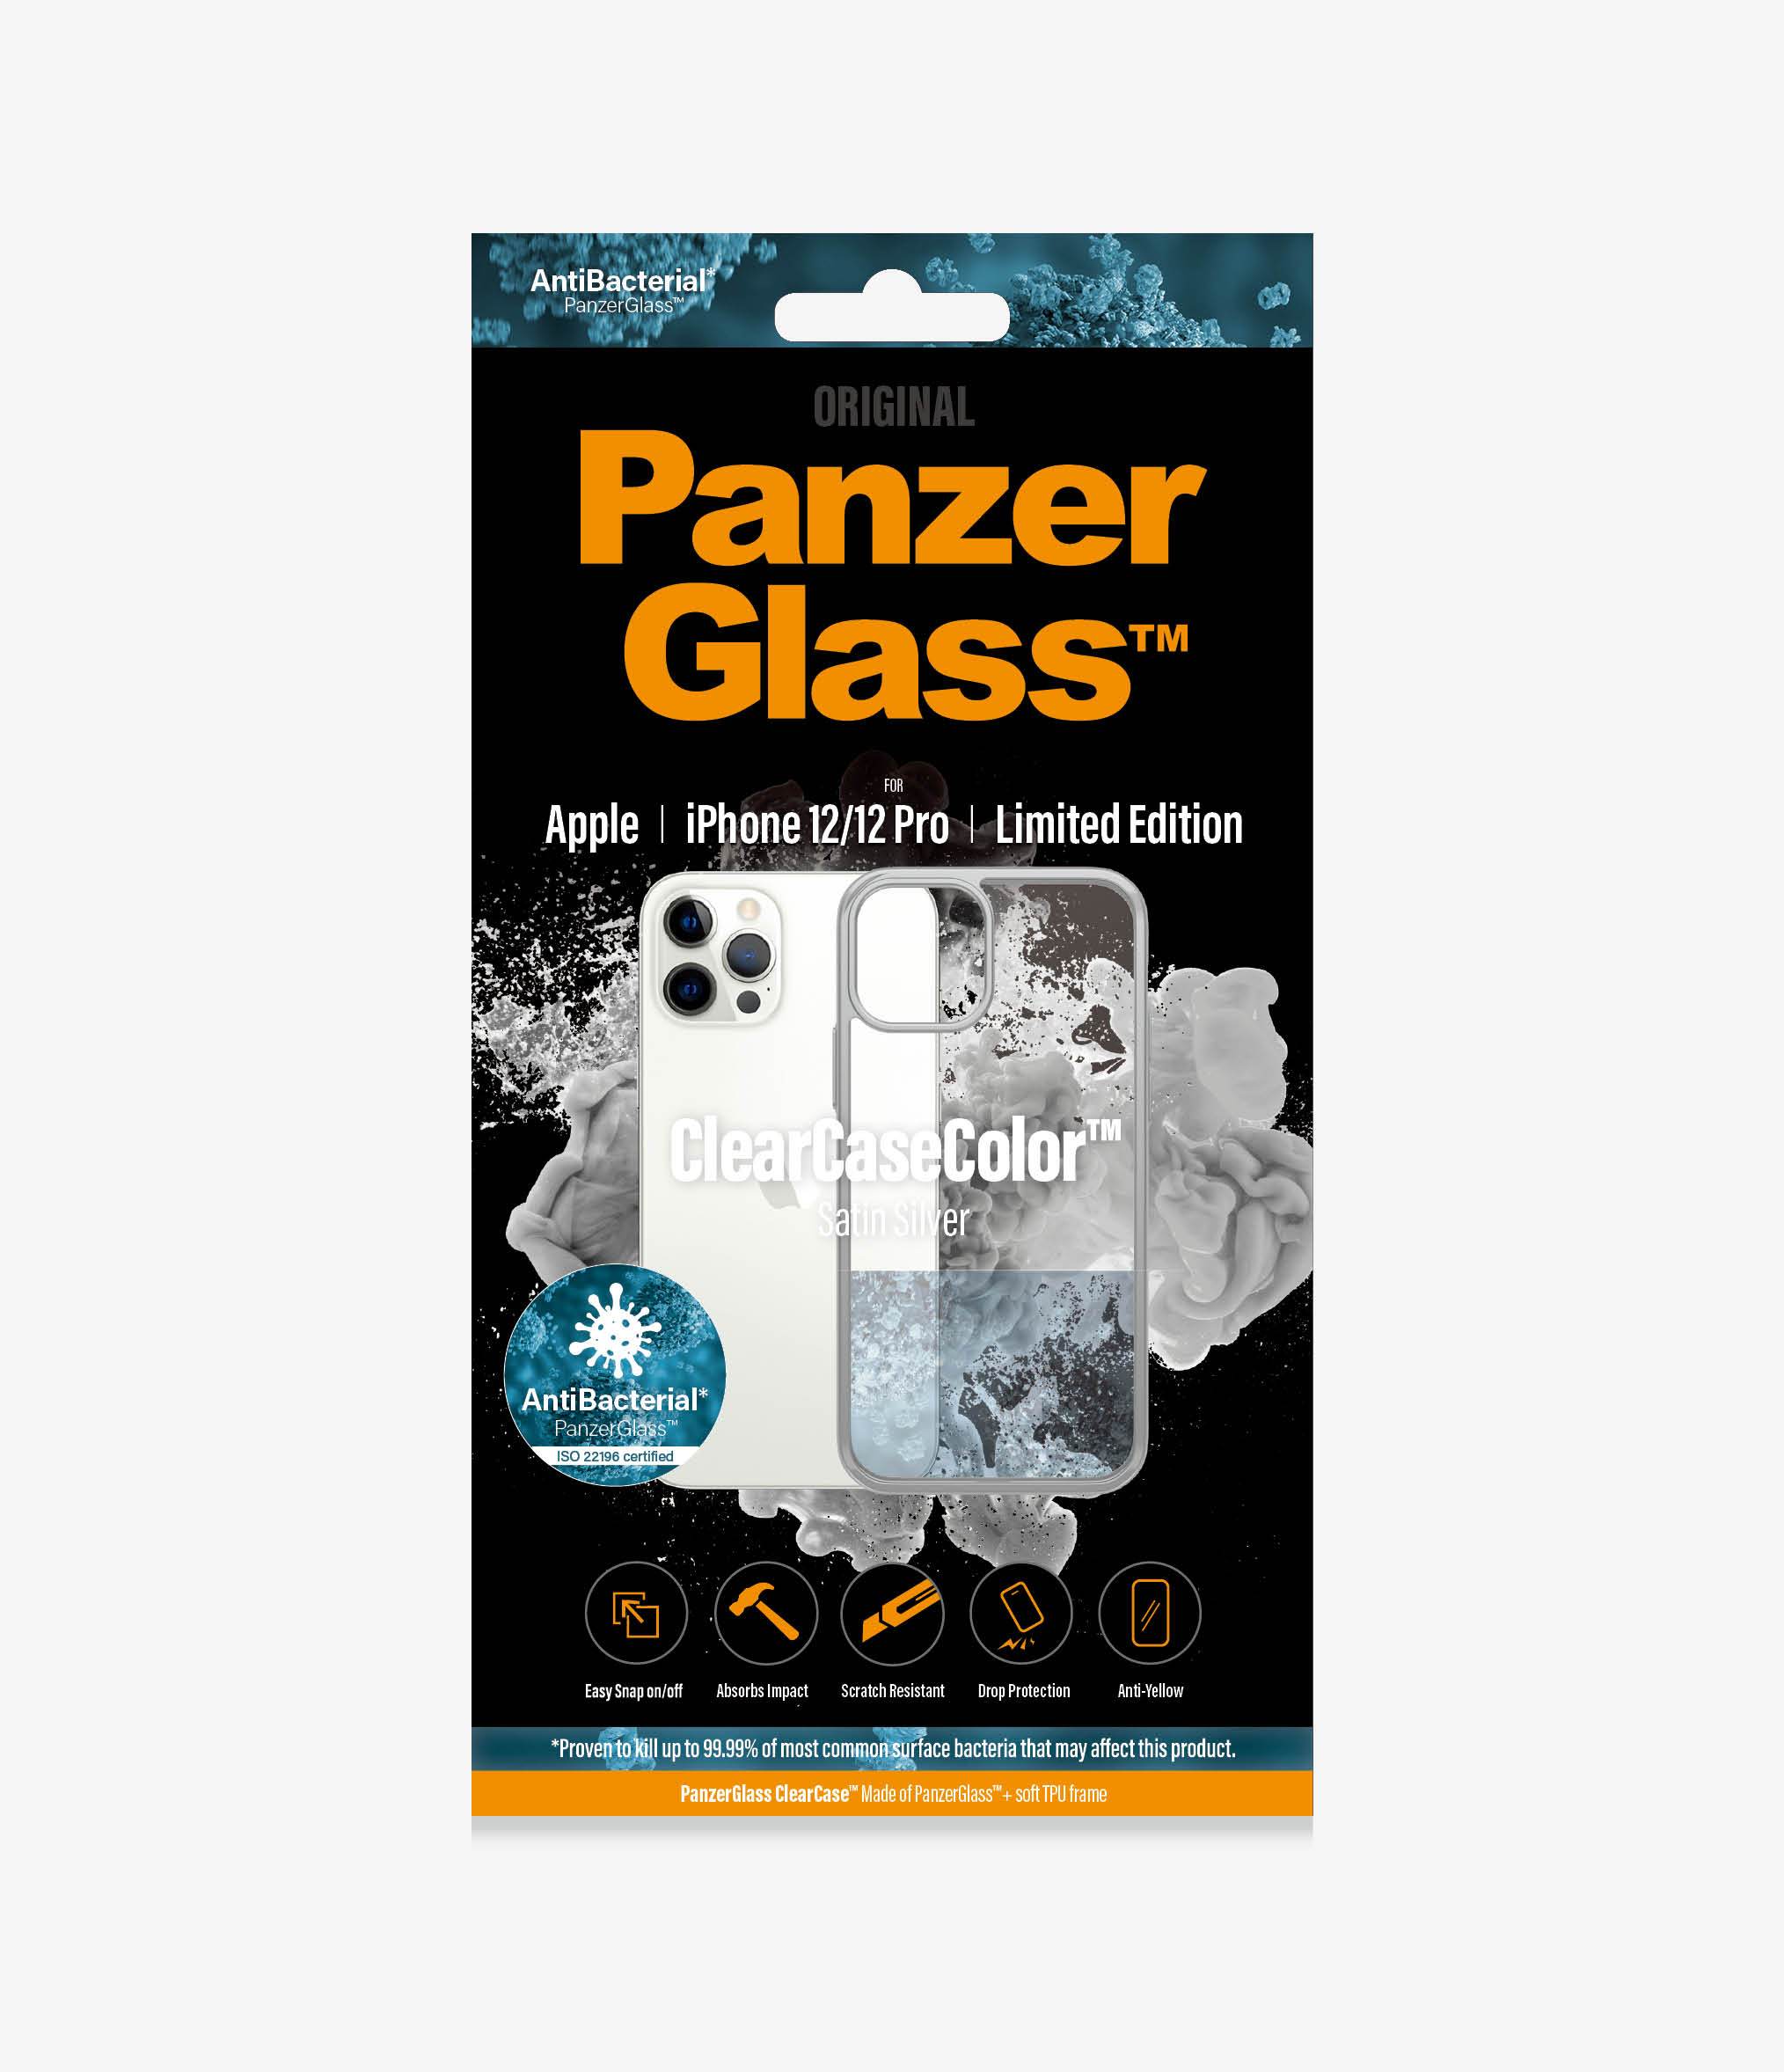 PanzerGlass™ ClearCaseColor™ Apple iPhone 12/12 Pro - Satin Silver Limited Edition (0271), Slim fashionable design, Tempered anti-aging glass back